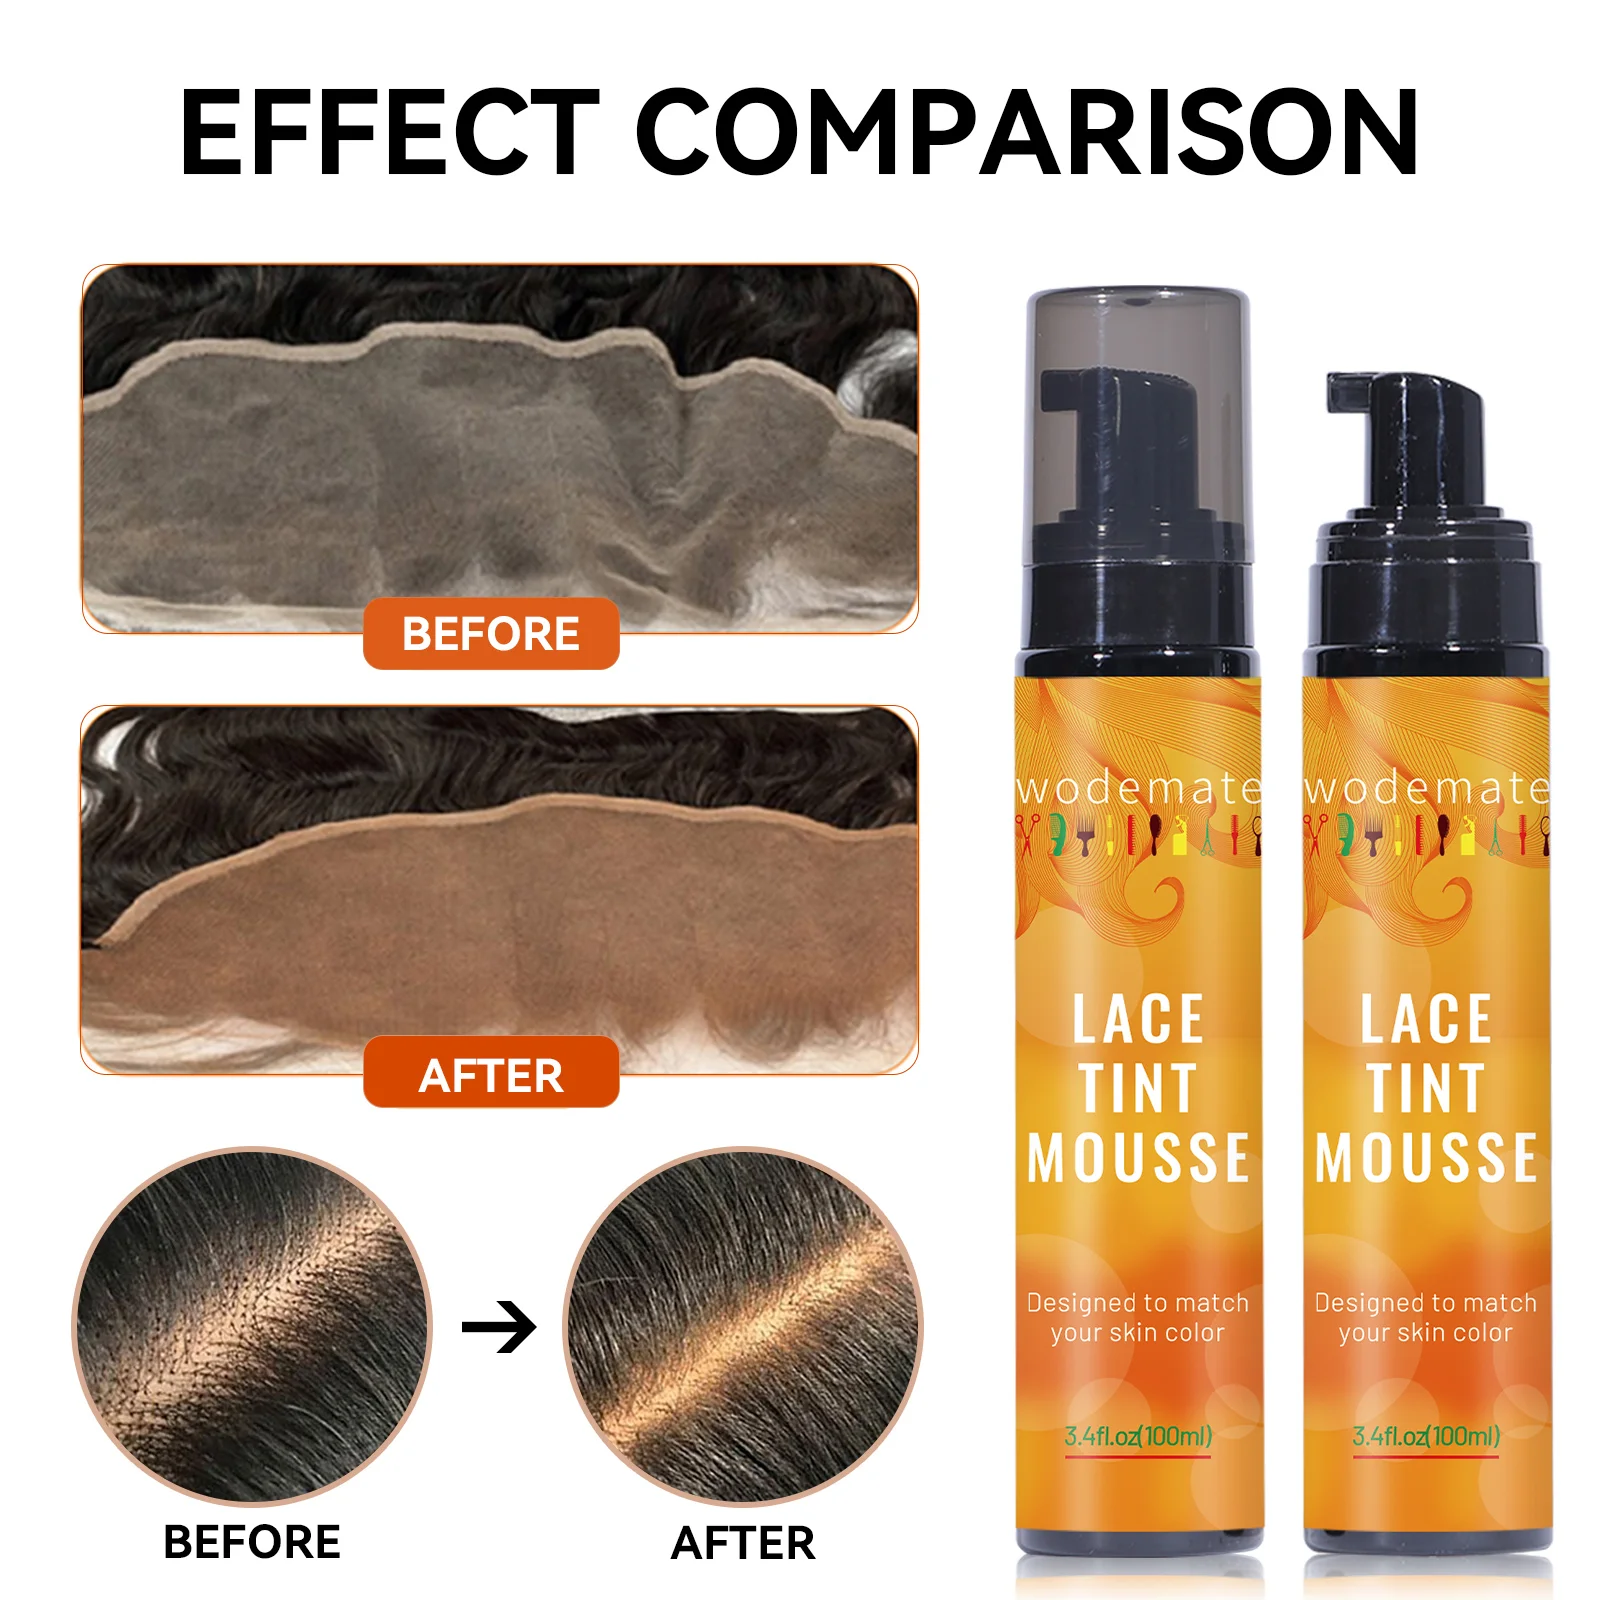 Lace Melting Spray For Lace Wigs Lace Wig Glue Waterproof Glue Spray  Invisible + Lace Tint Mousse For Wigs Melt - AliExpress